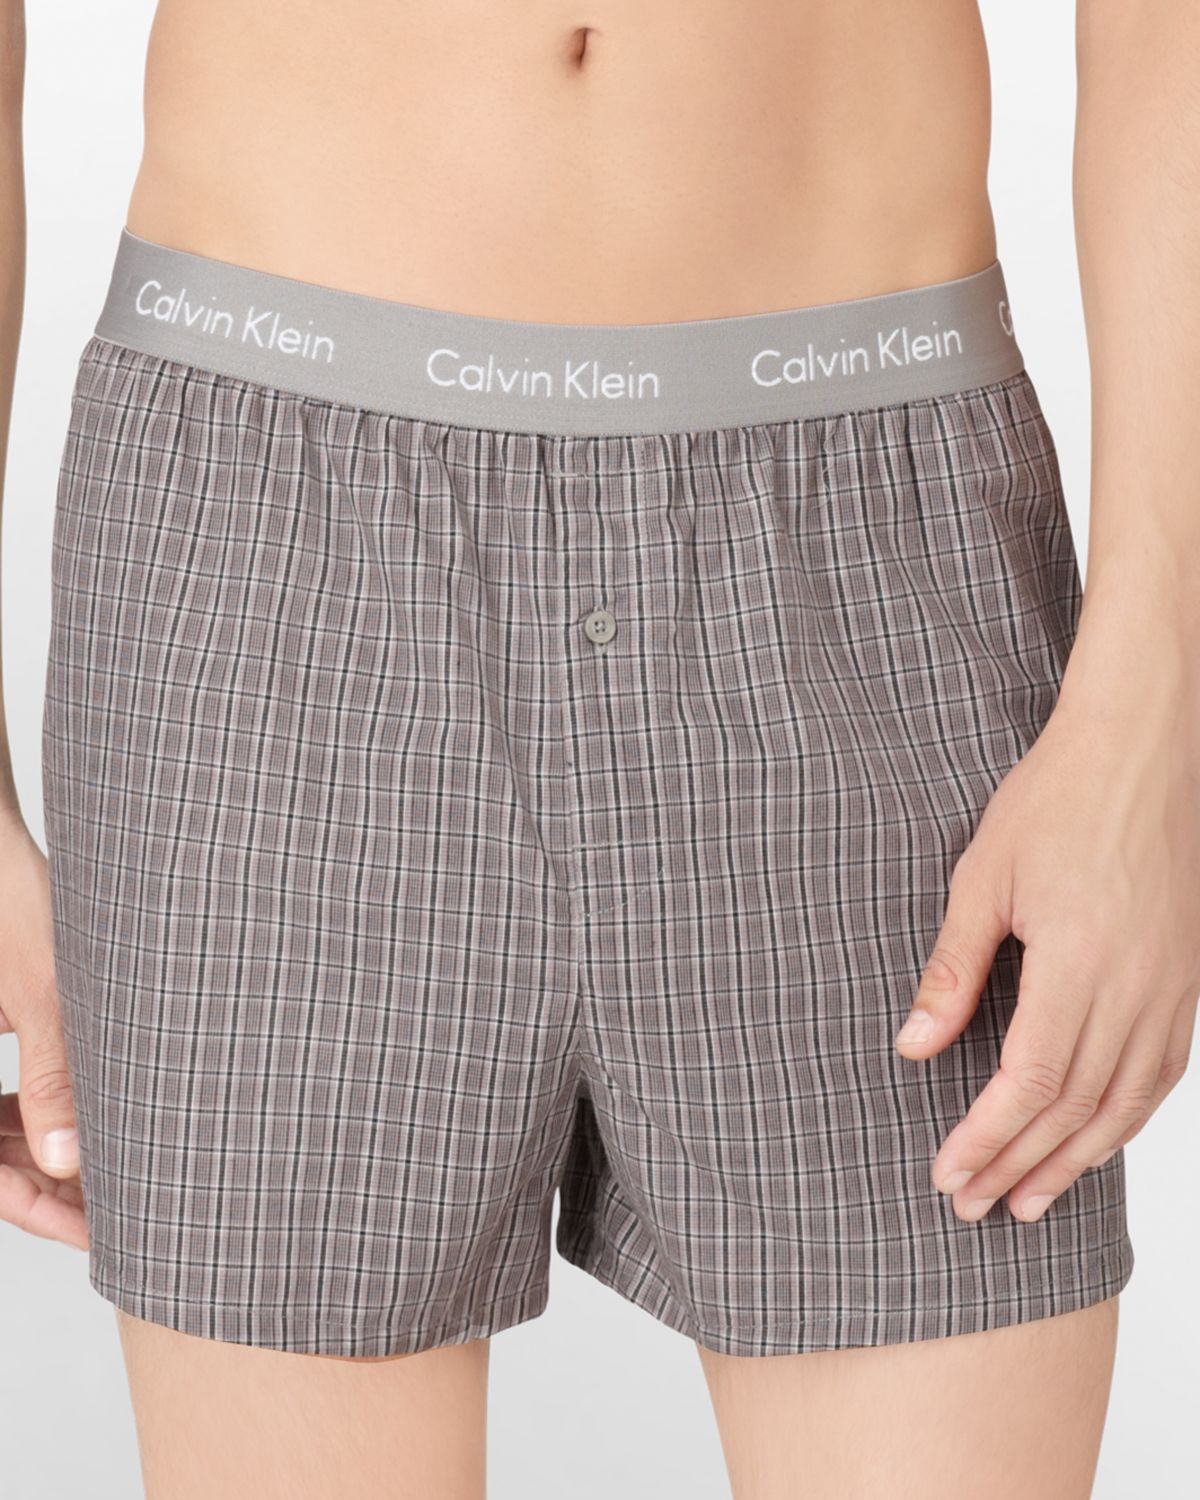 Calvin Klein Slim Fit Woven Plaid Boxer Shorts In Gray For Men Lyst